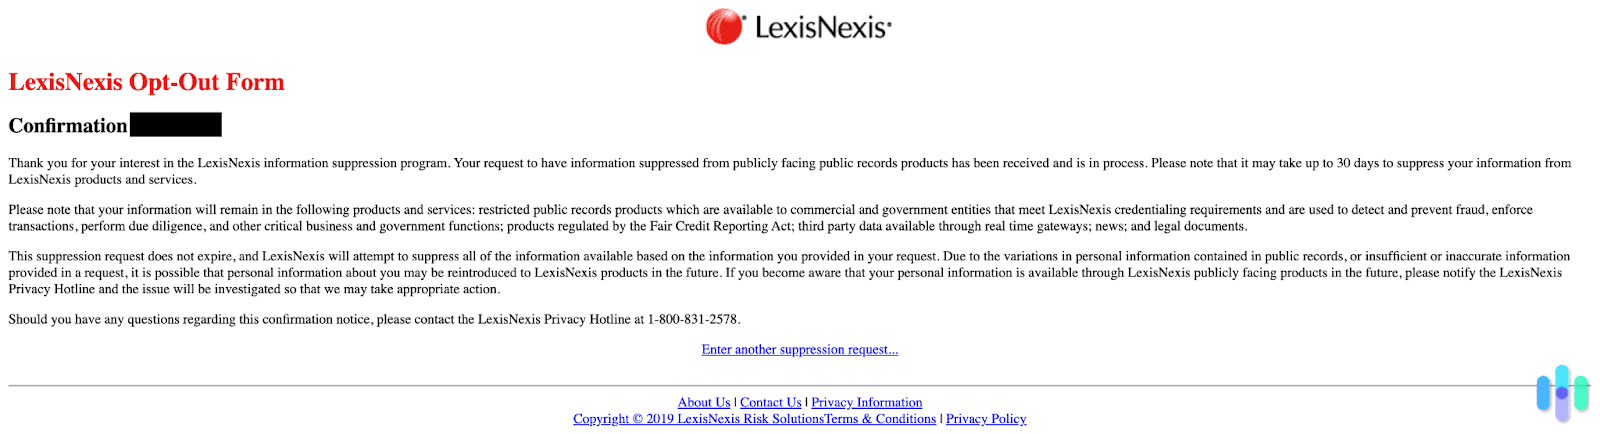 LexisNexis confirmation number